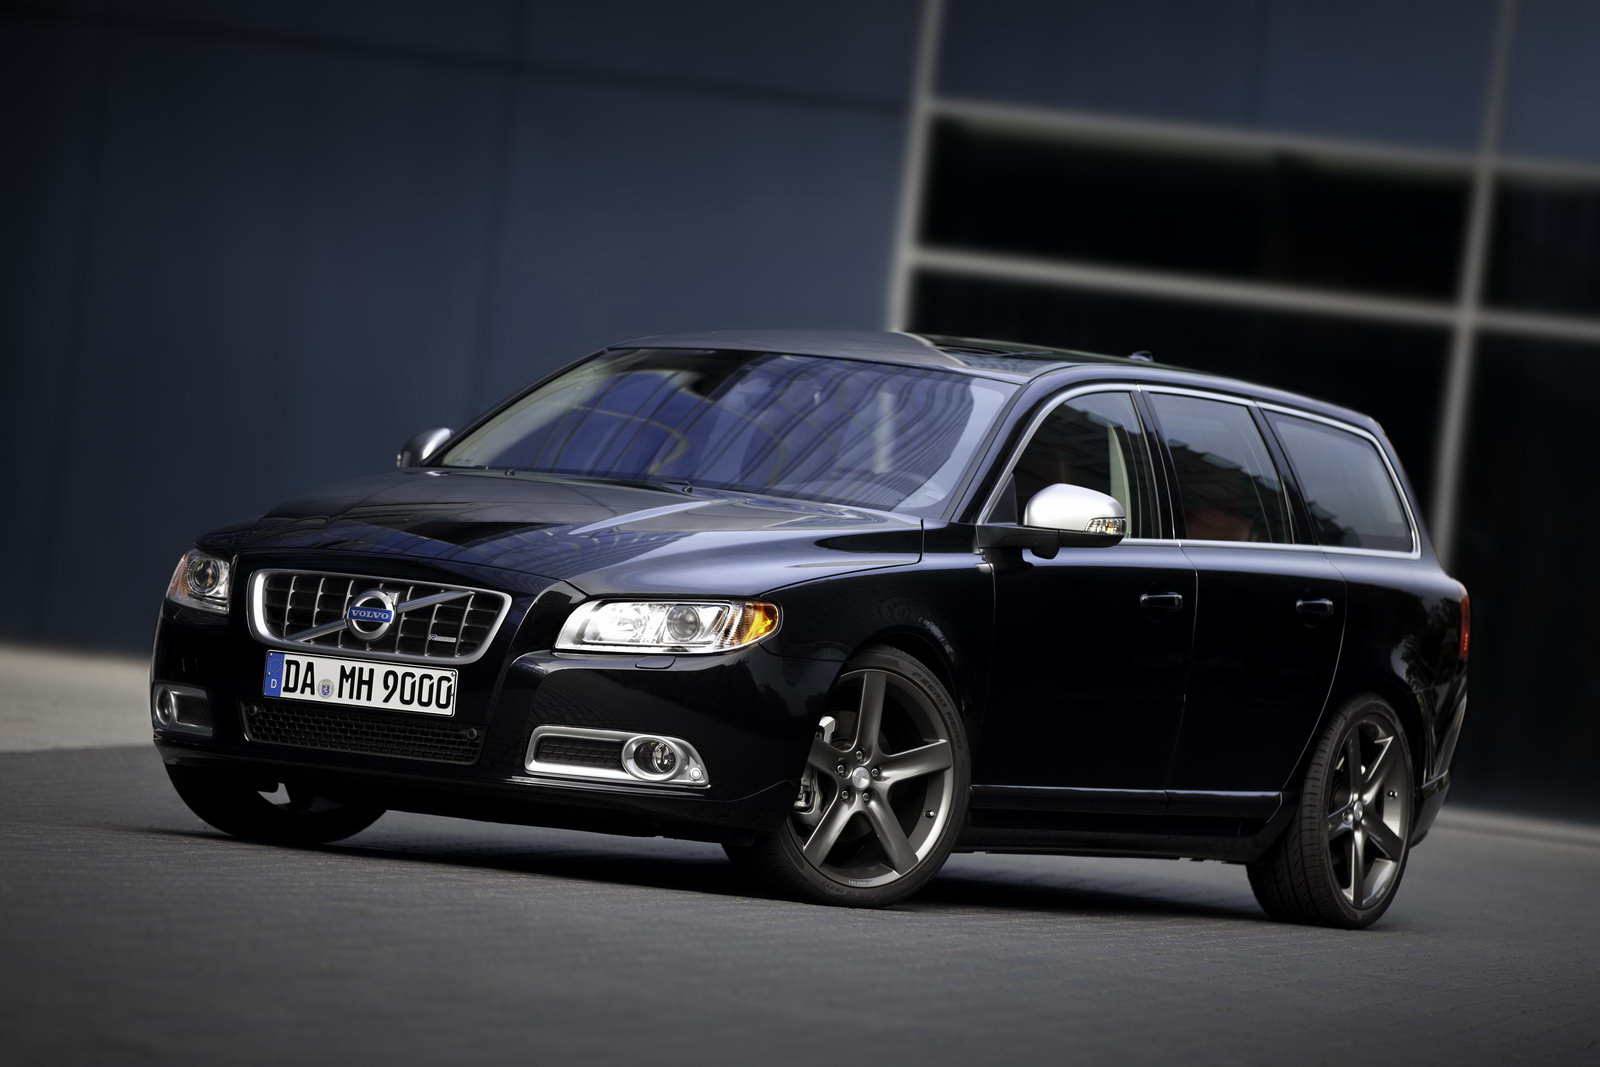 Limited Edition Volvo V70 T6 AWD R-Design with 325HP by Heico Sportiv |  Carscoops